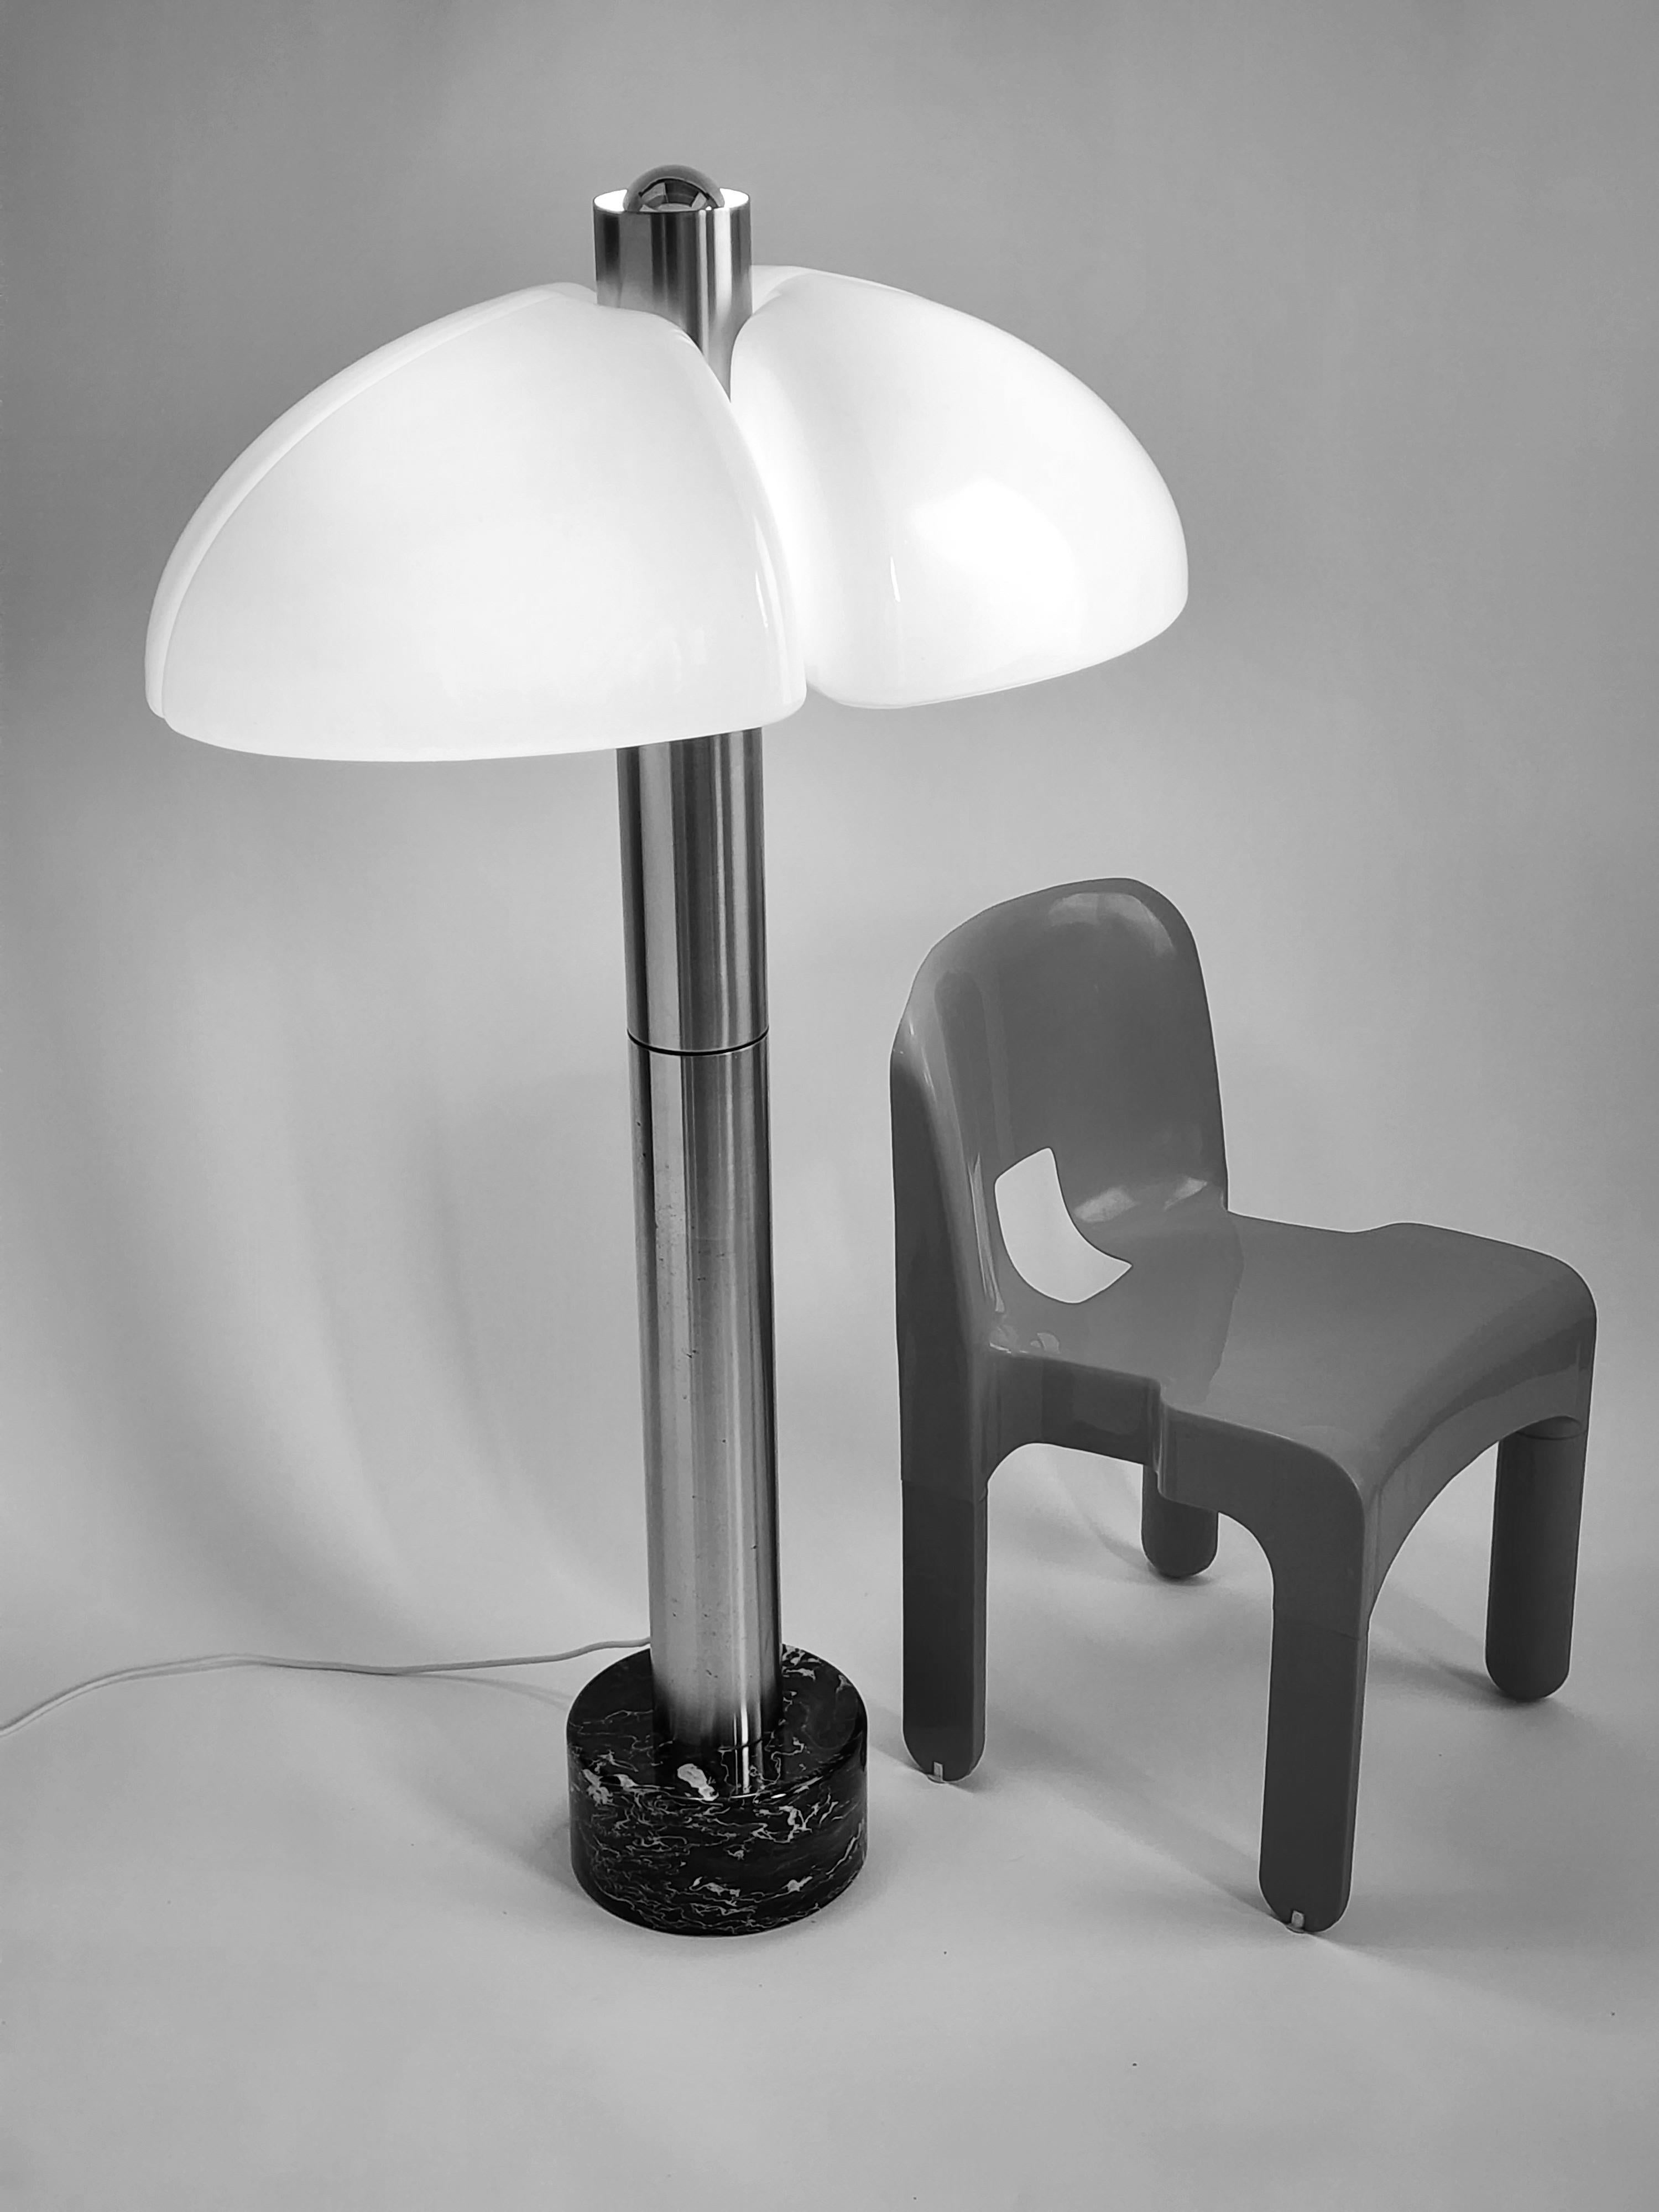 Rare massive  stainless steel floor lamp with acrylic shades from Sergio Mazza and Giuliana Gramigna for Quattrifolio Design , Italy . 

Base is made out of  black Portofino marble . 

Contain  three  E26 size socket . 2 on each side and one on top